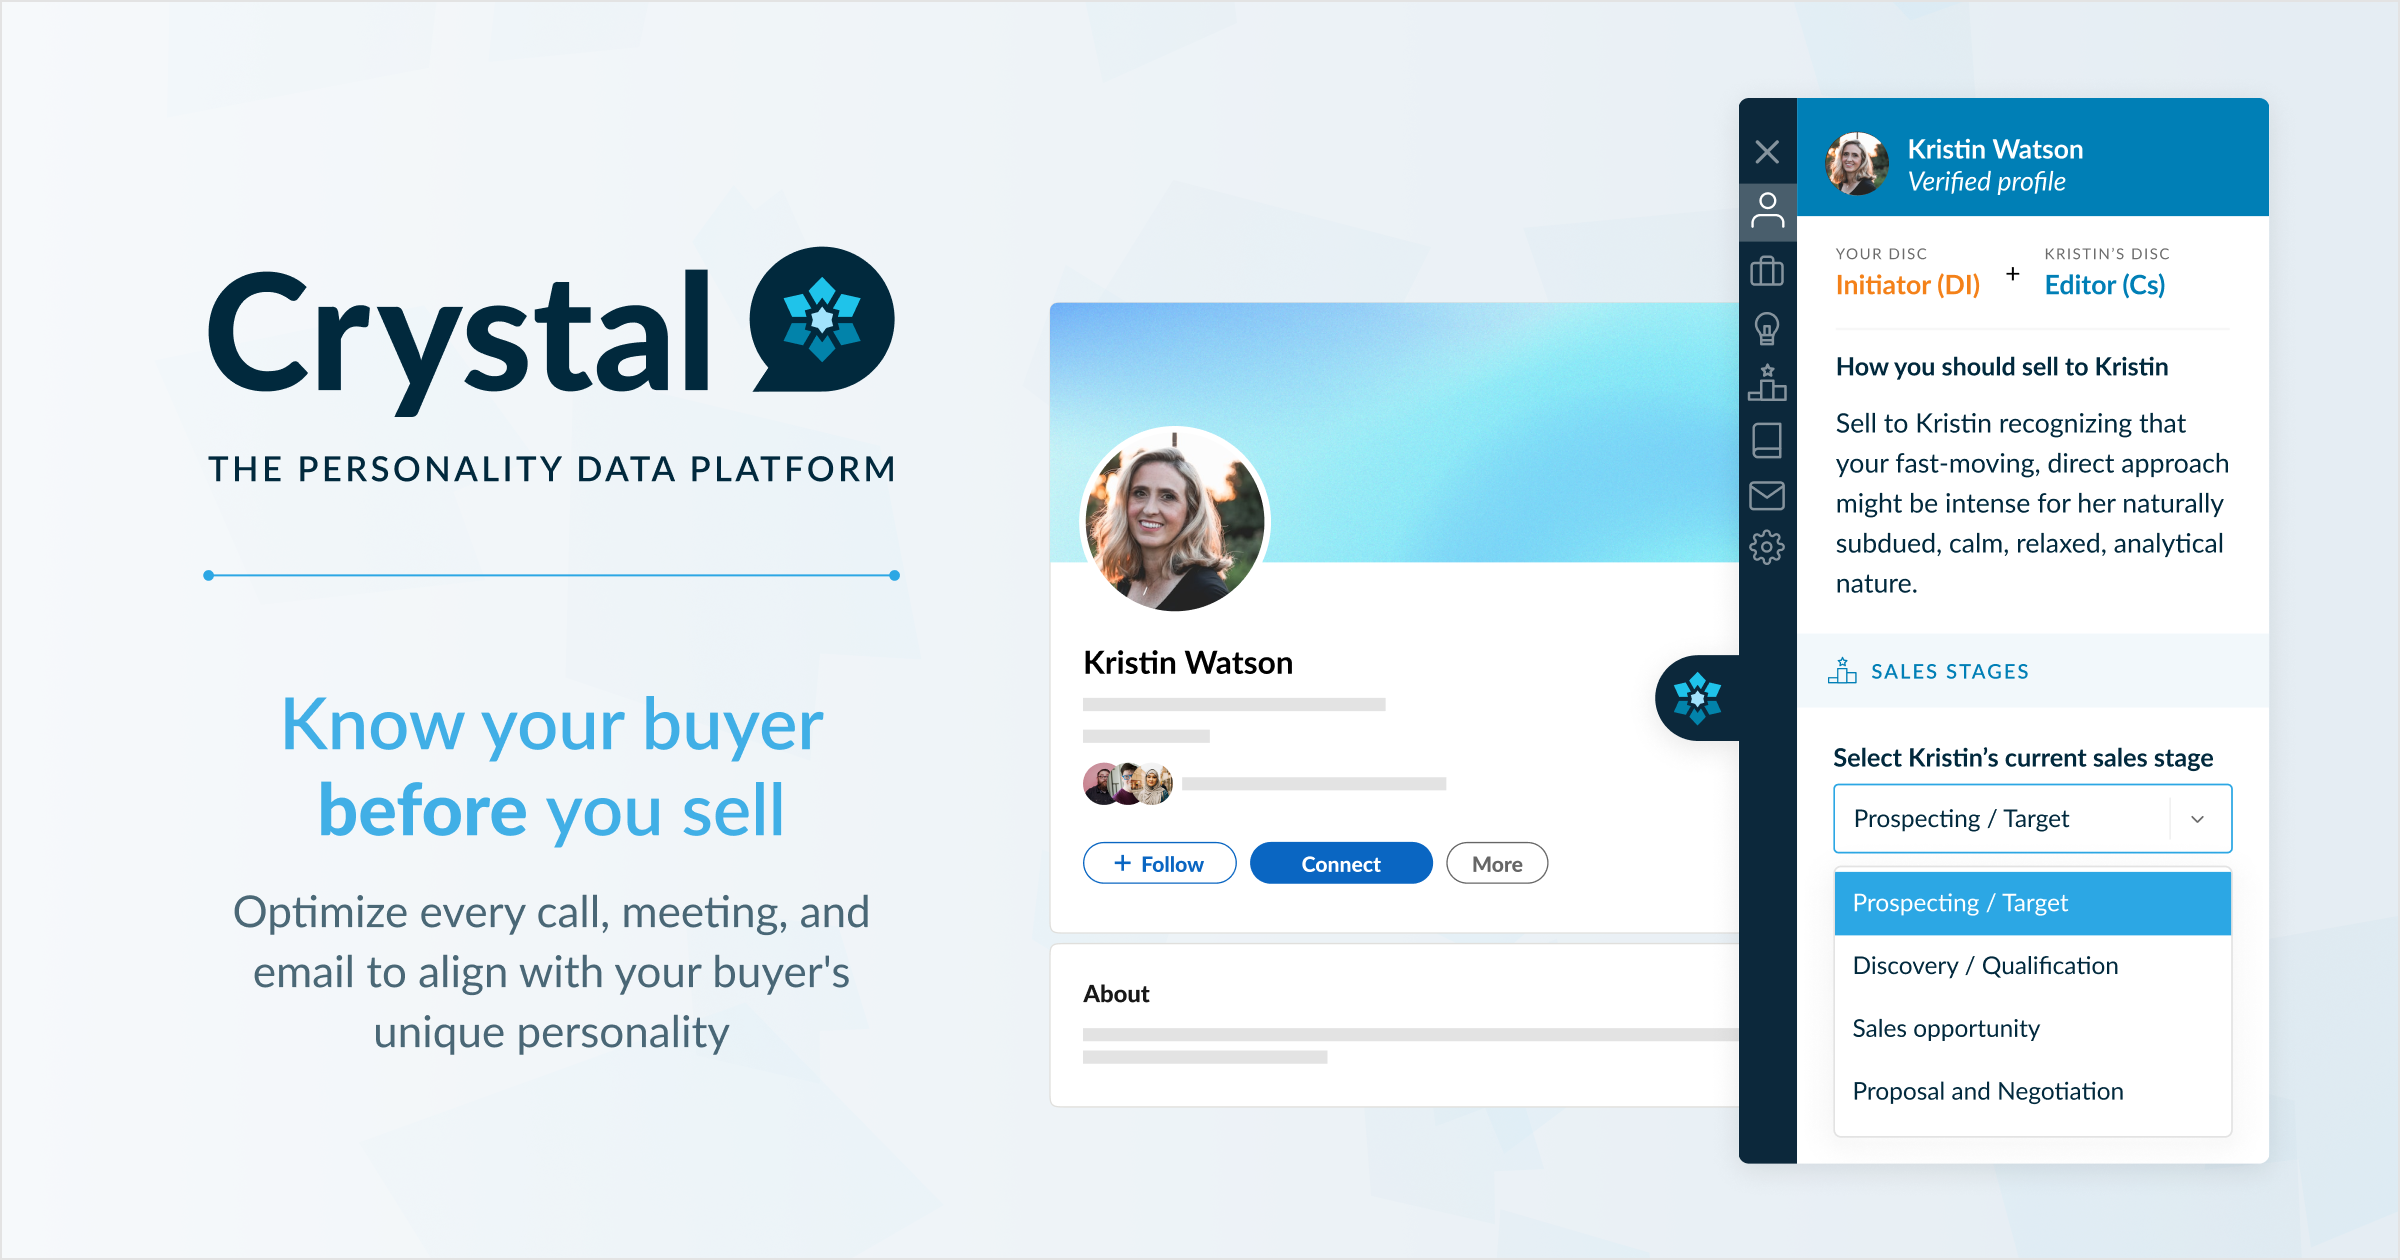 Crystal, the personality data platform